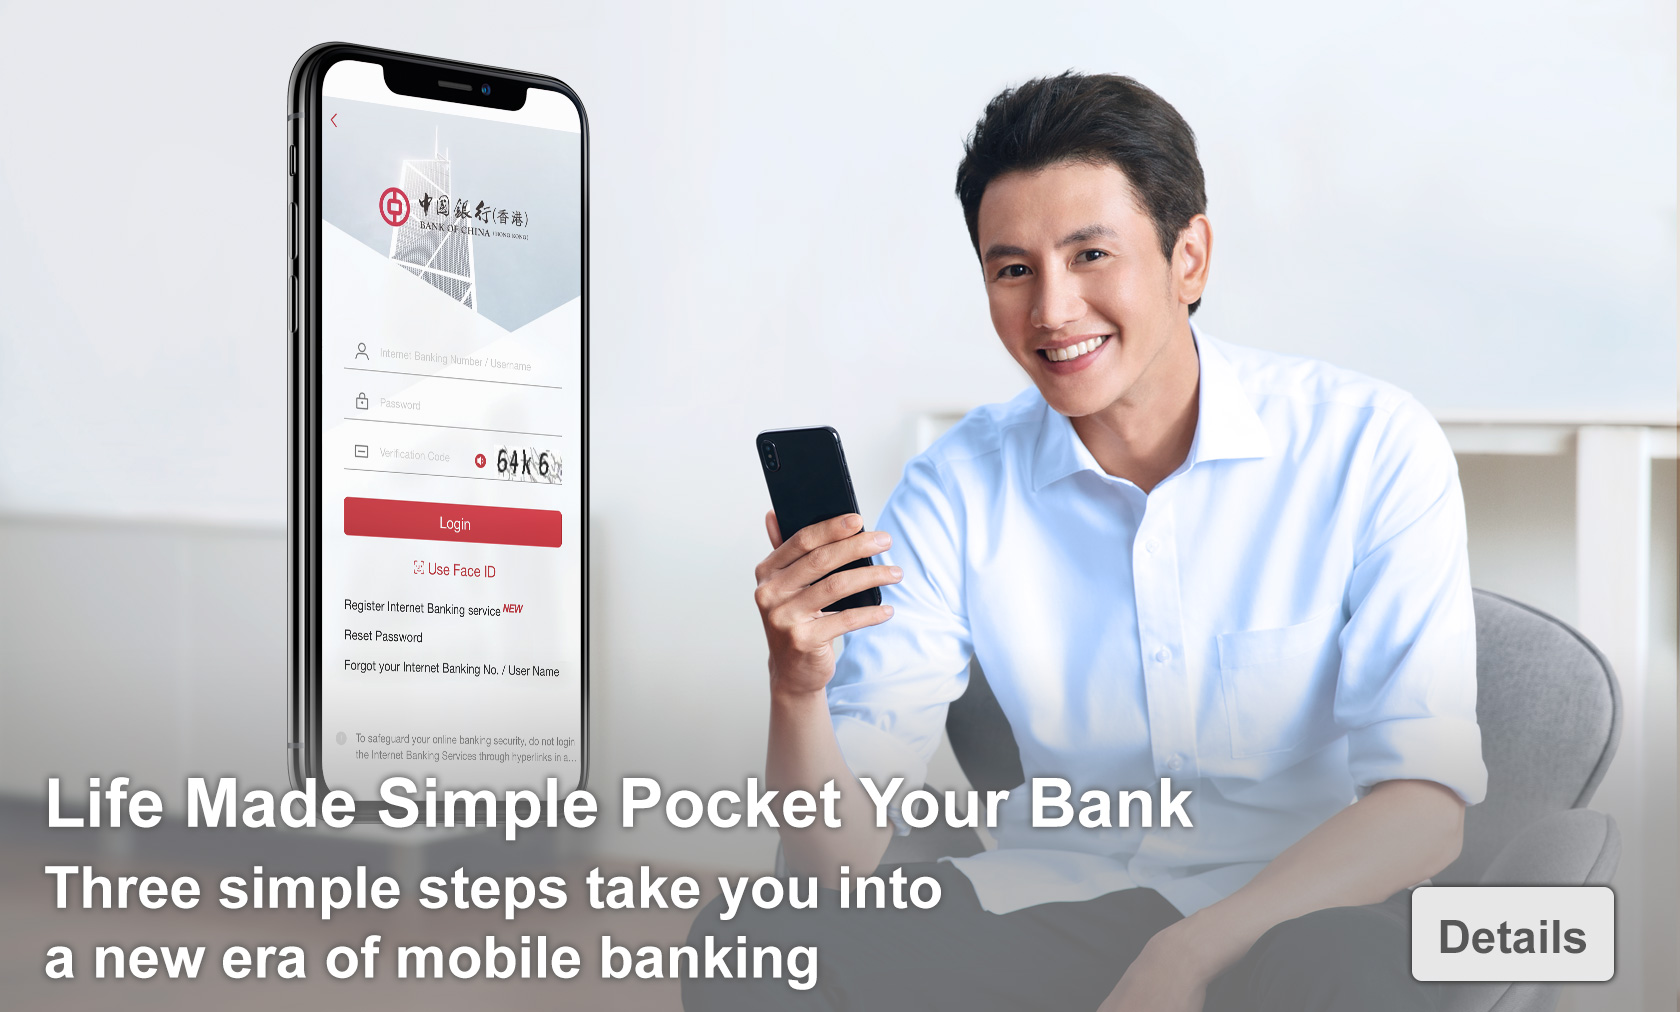 Life Made Simple Pocket Your Bank
        Three simple steps take you into a new era of mobile banking